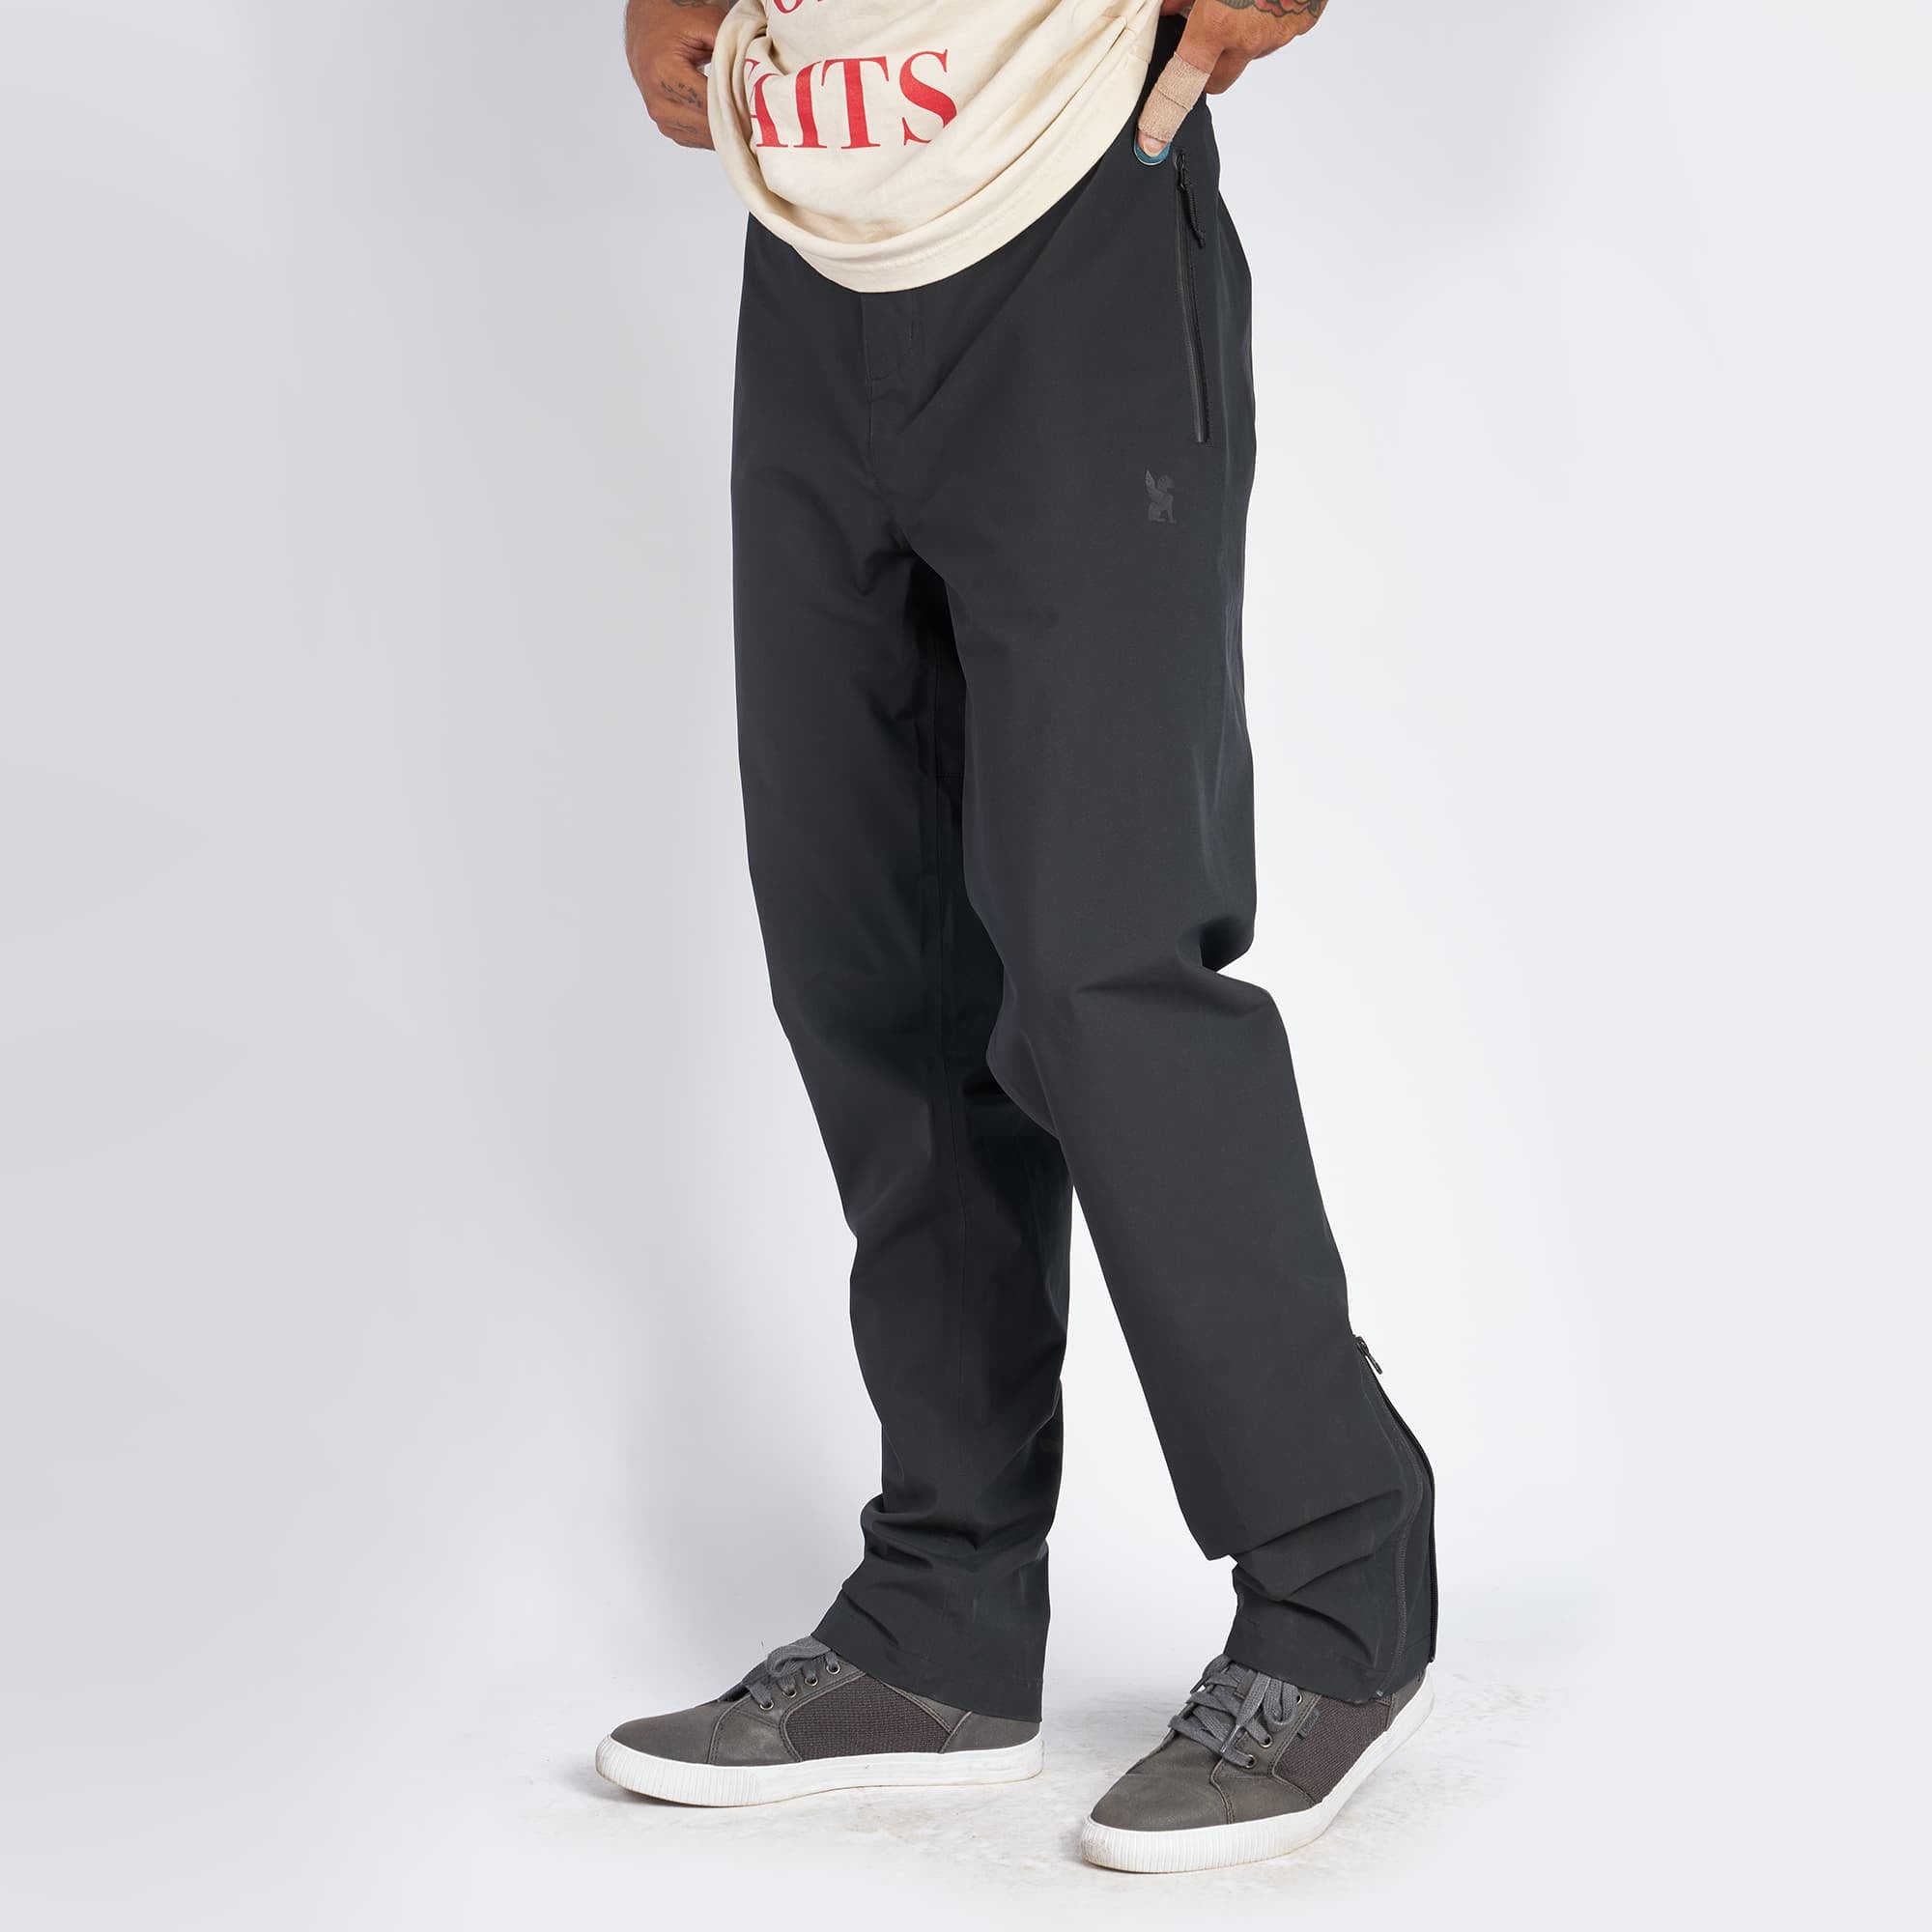 Waterproof rain pant in black shown on a man front view